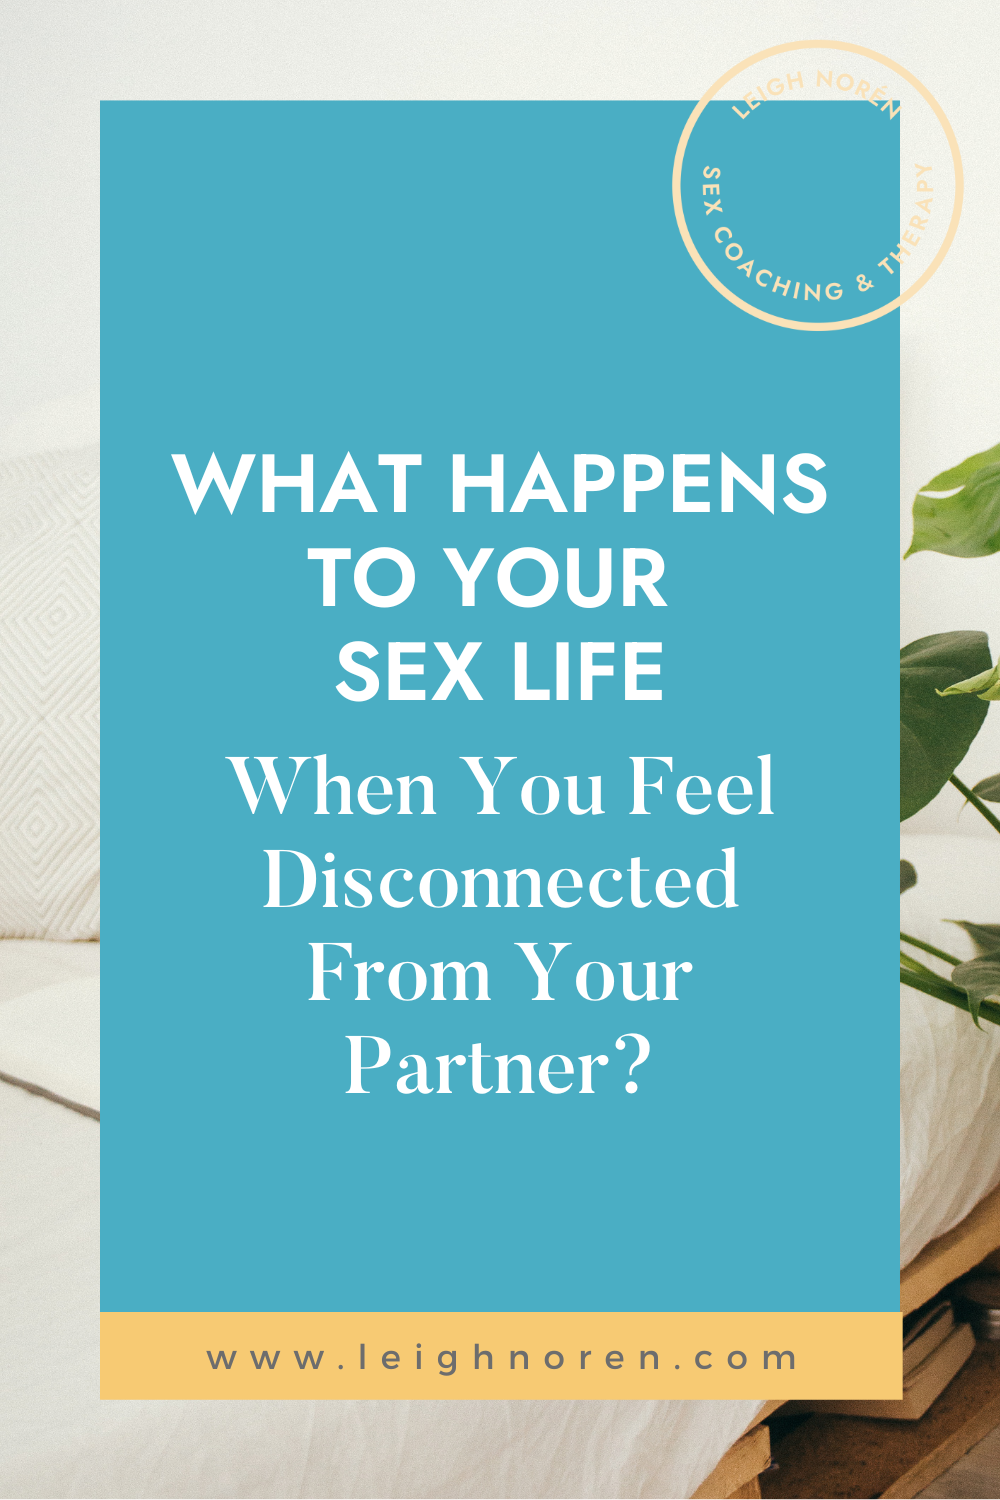 What Happens To Your Sex Life When You Feel Disconnected From Your Partner?